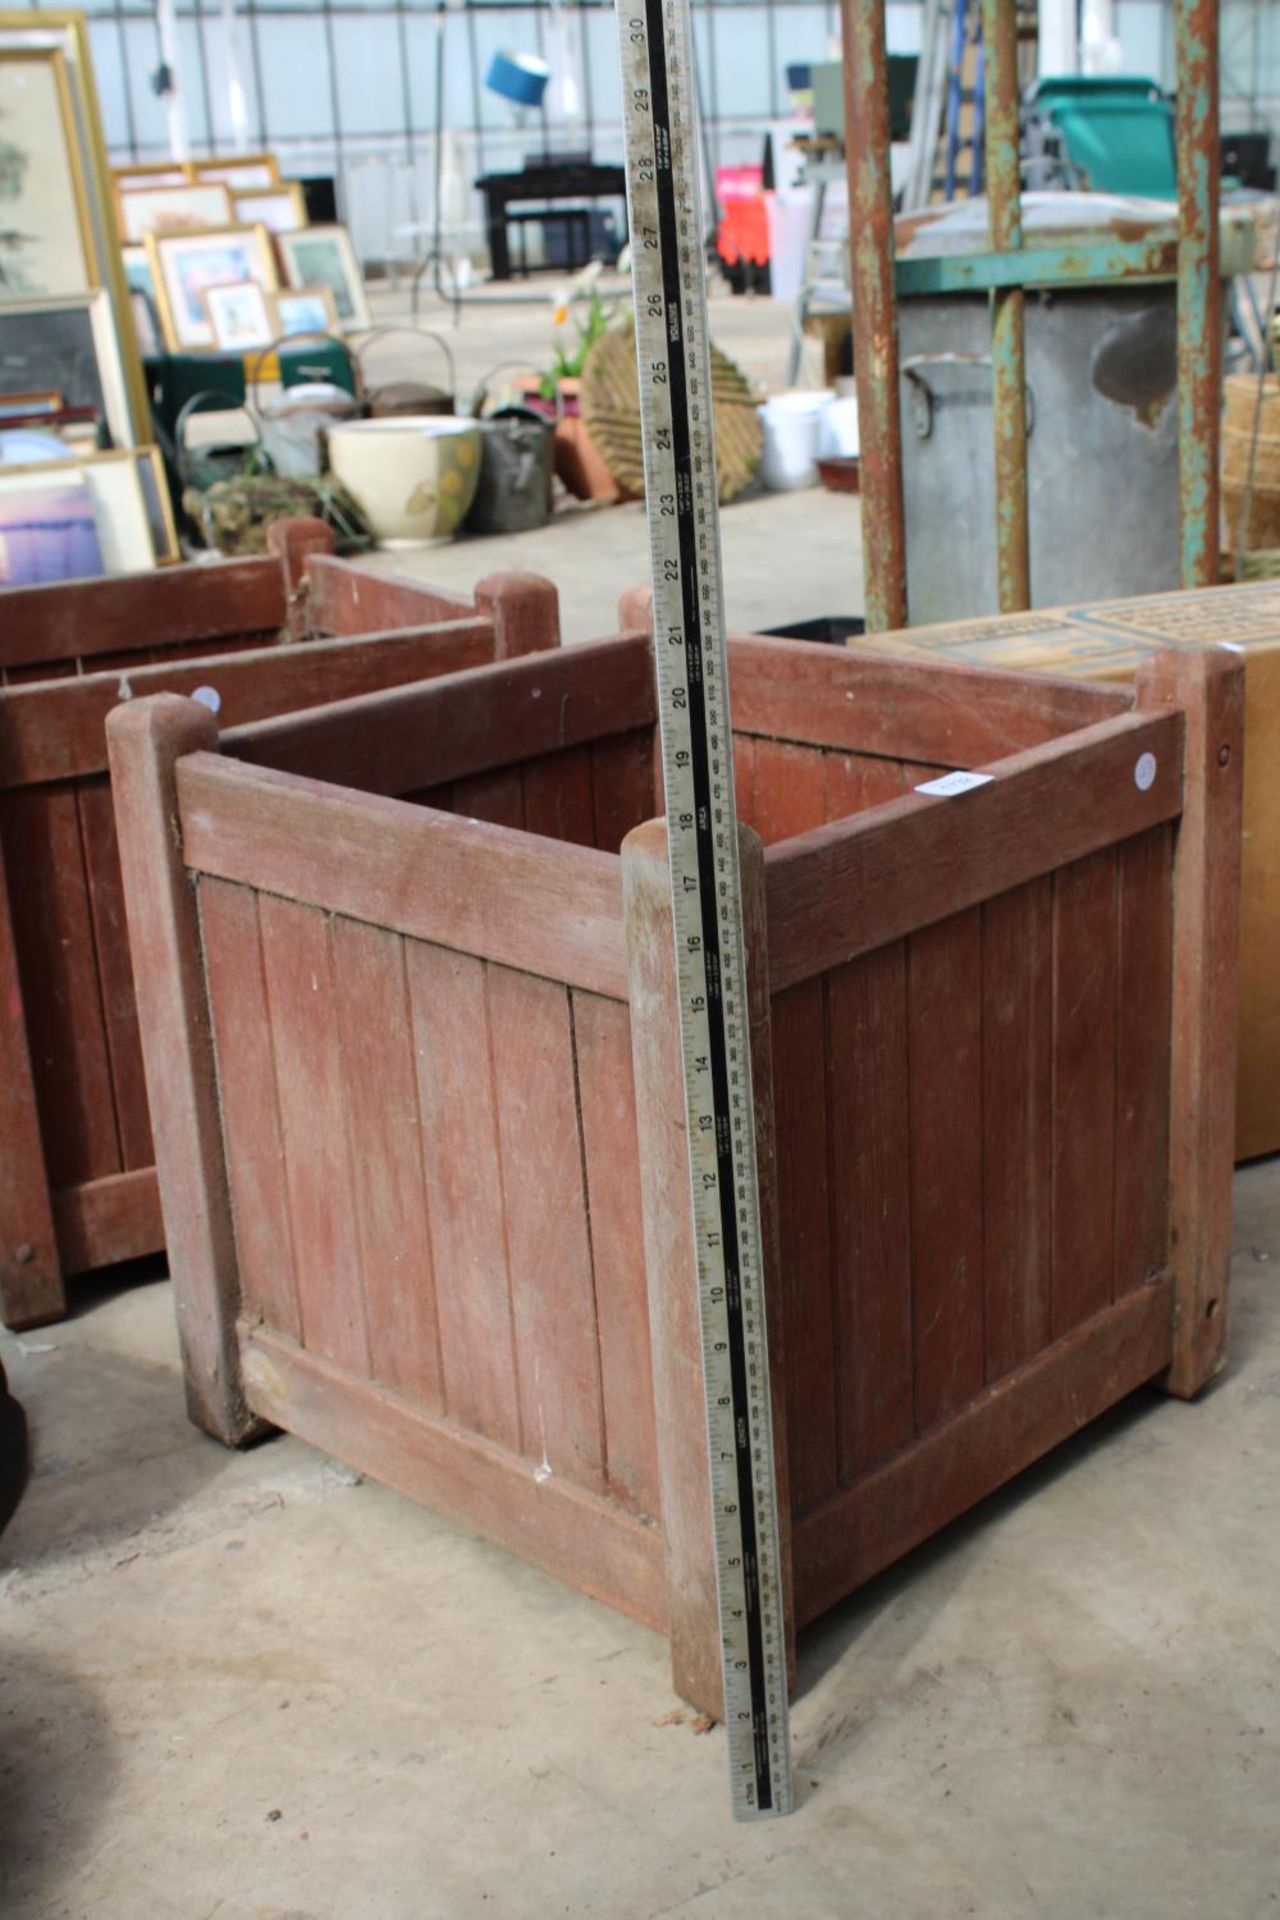 TWO SQUARE WOODEN PLANTERS - Image 3 of 3